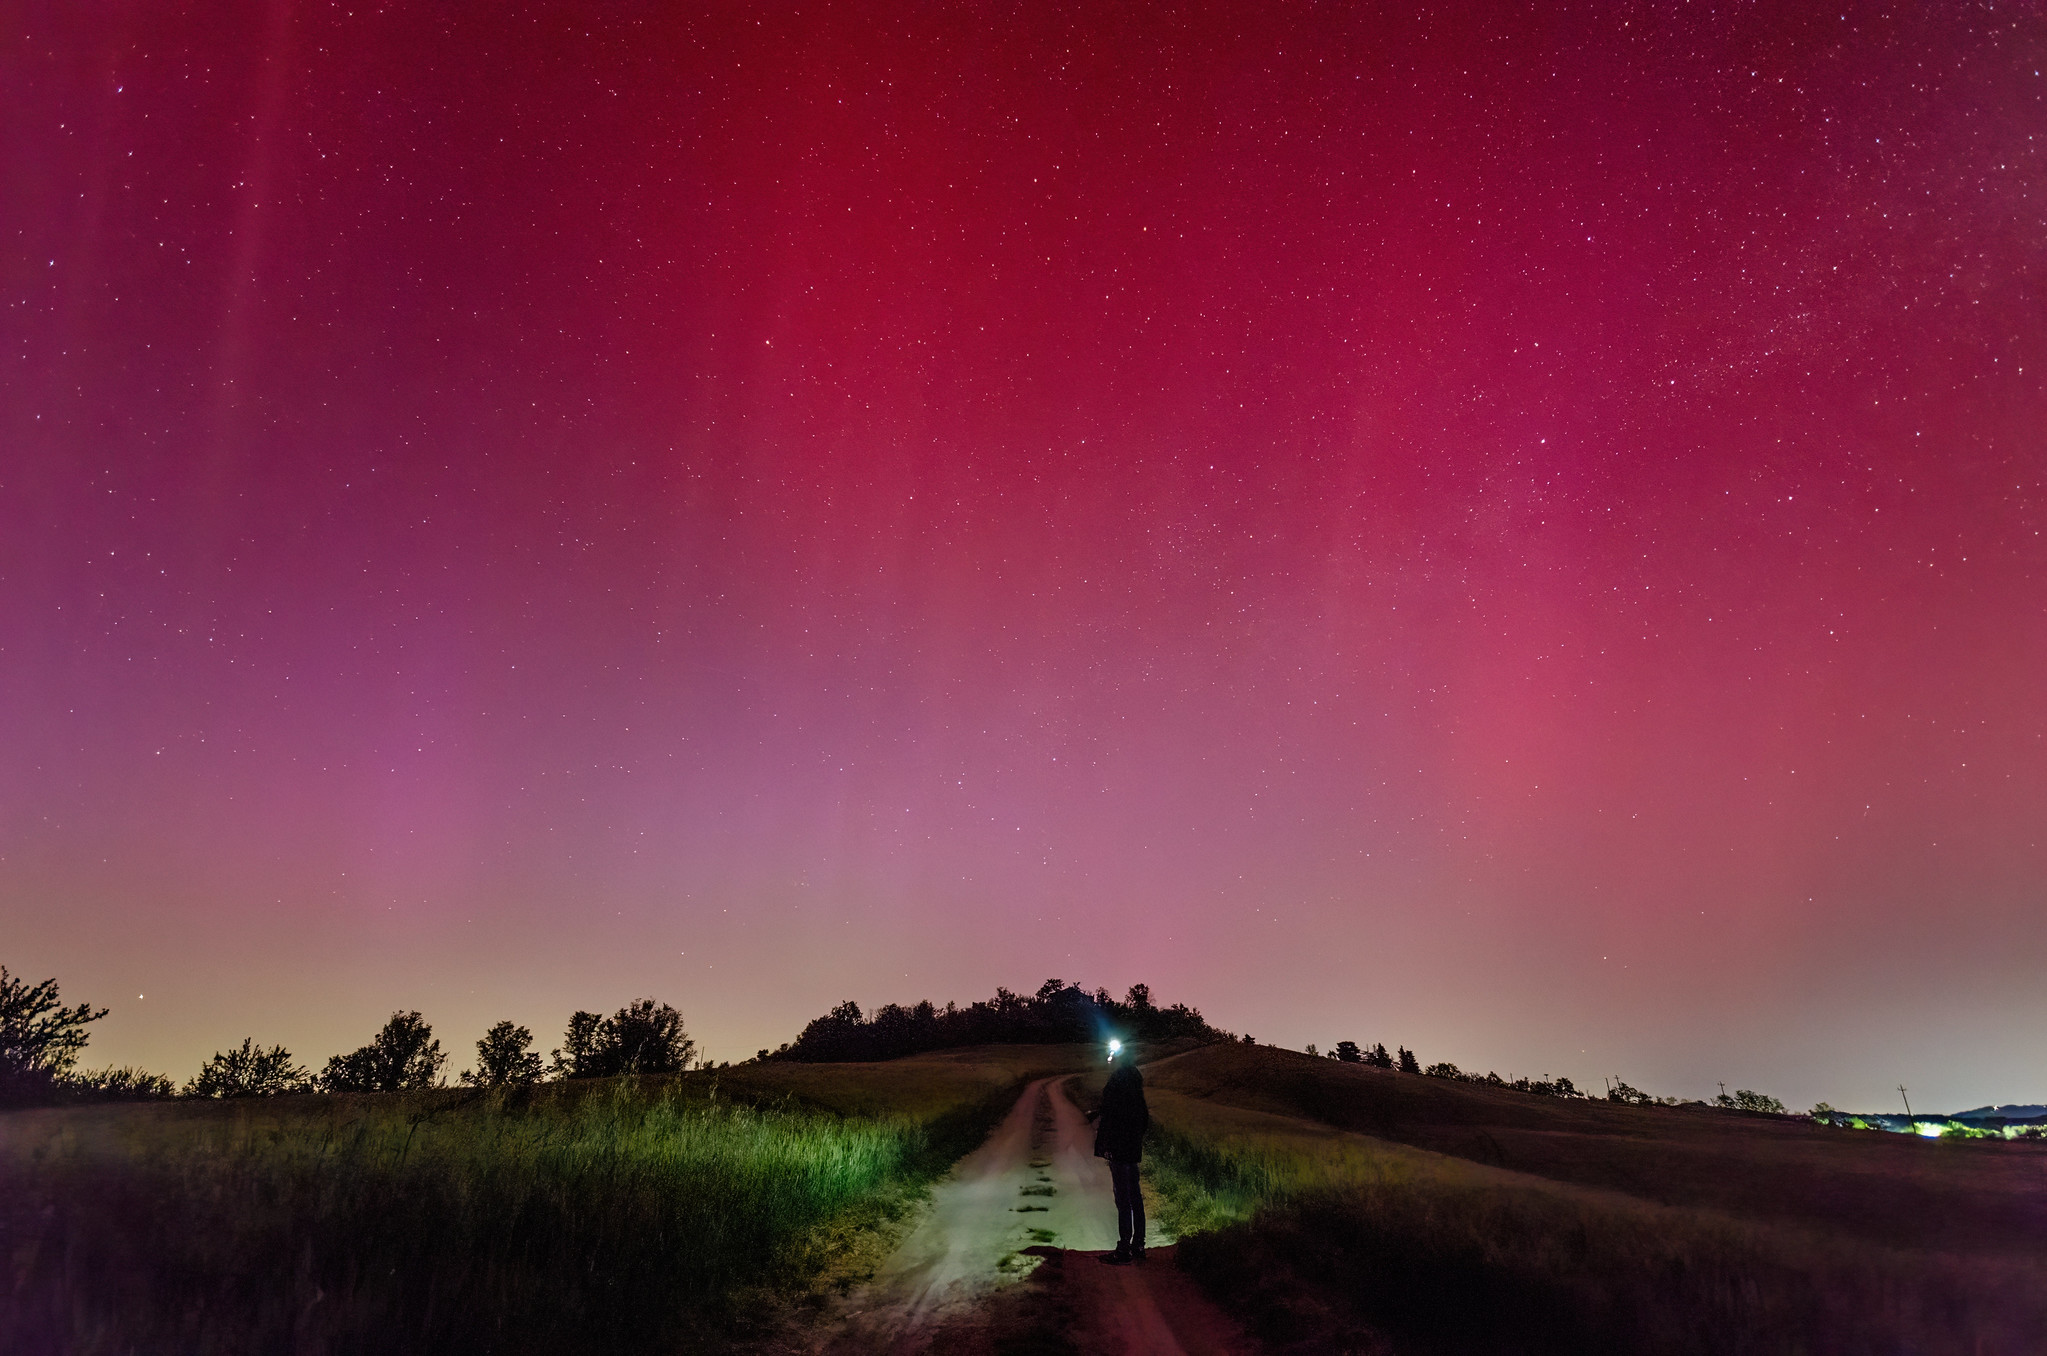 Northern lights photographed in Italy.